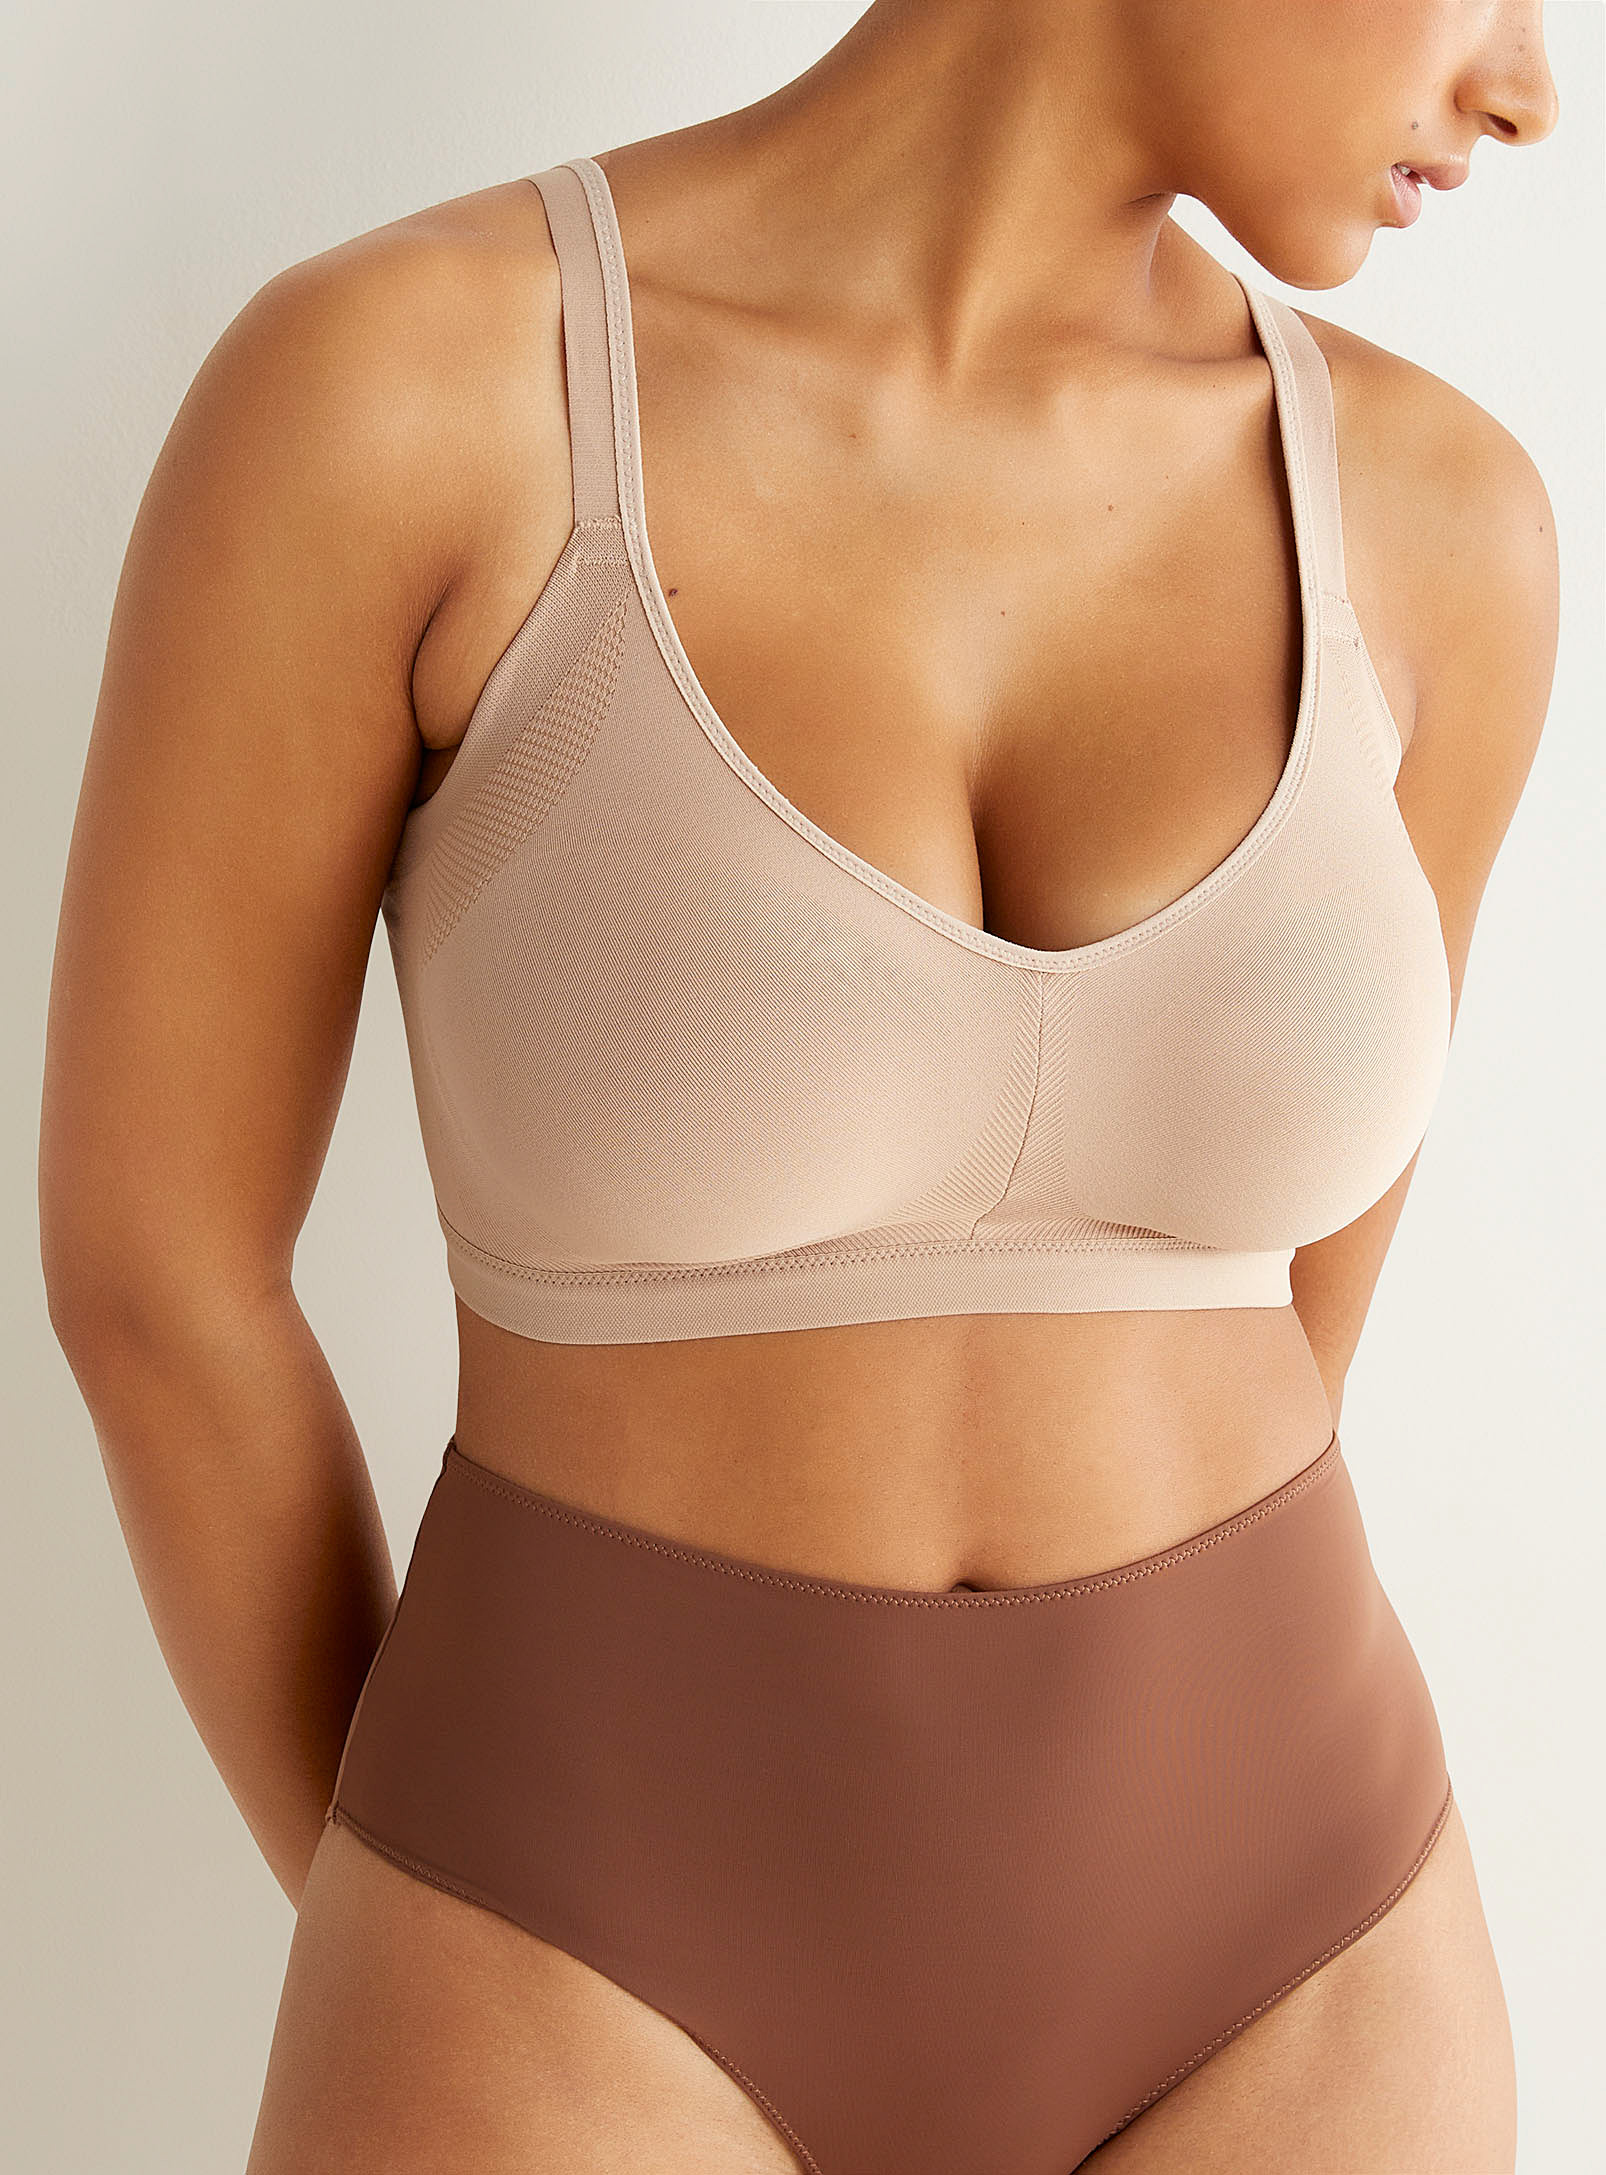 Warner's No Side Effects Back-smoothing Contour Bra Rn2231a In Blush